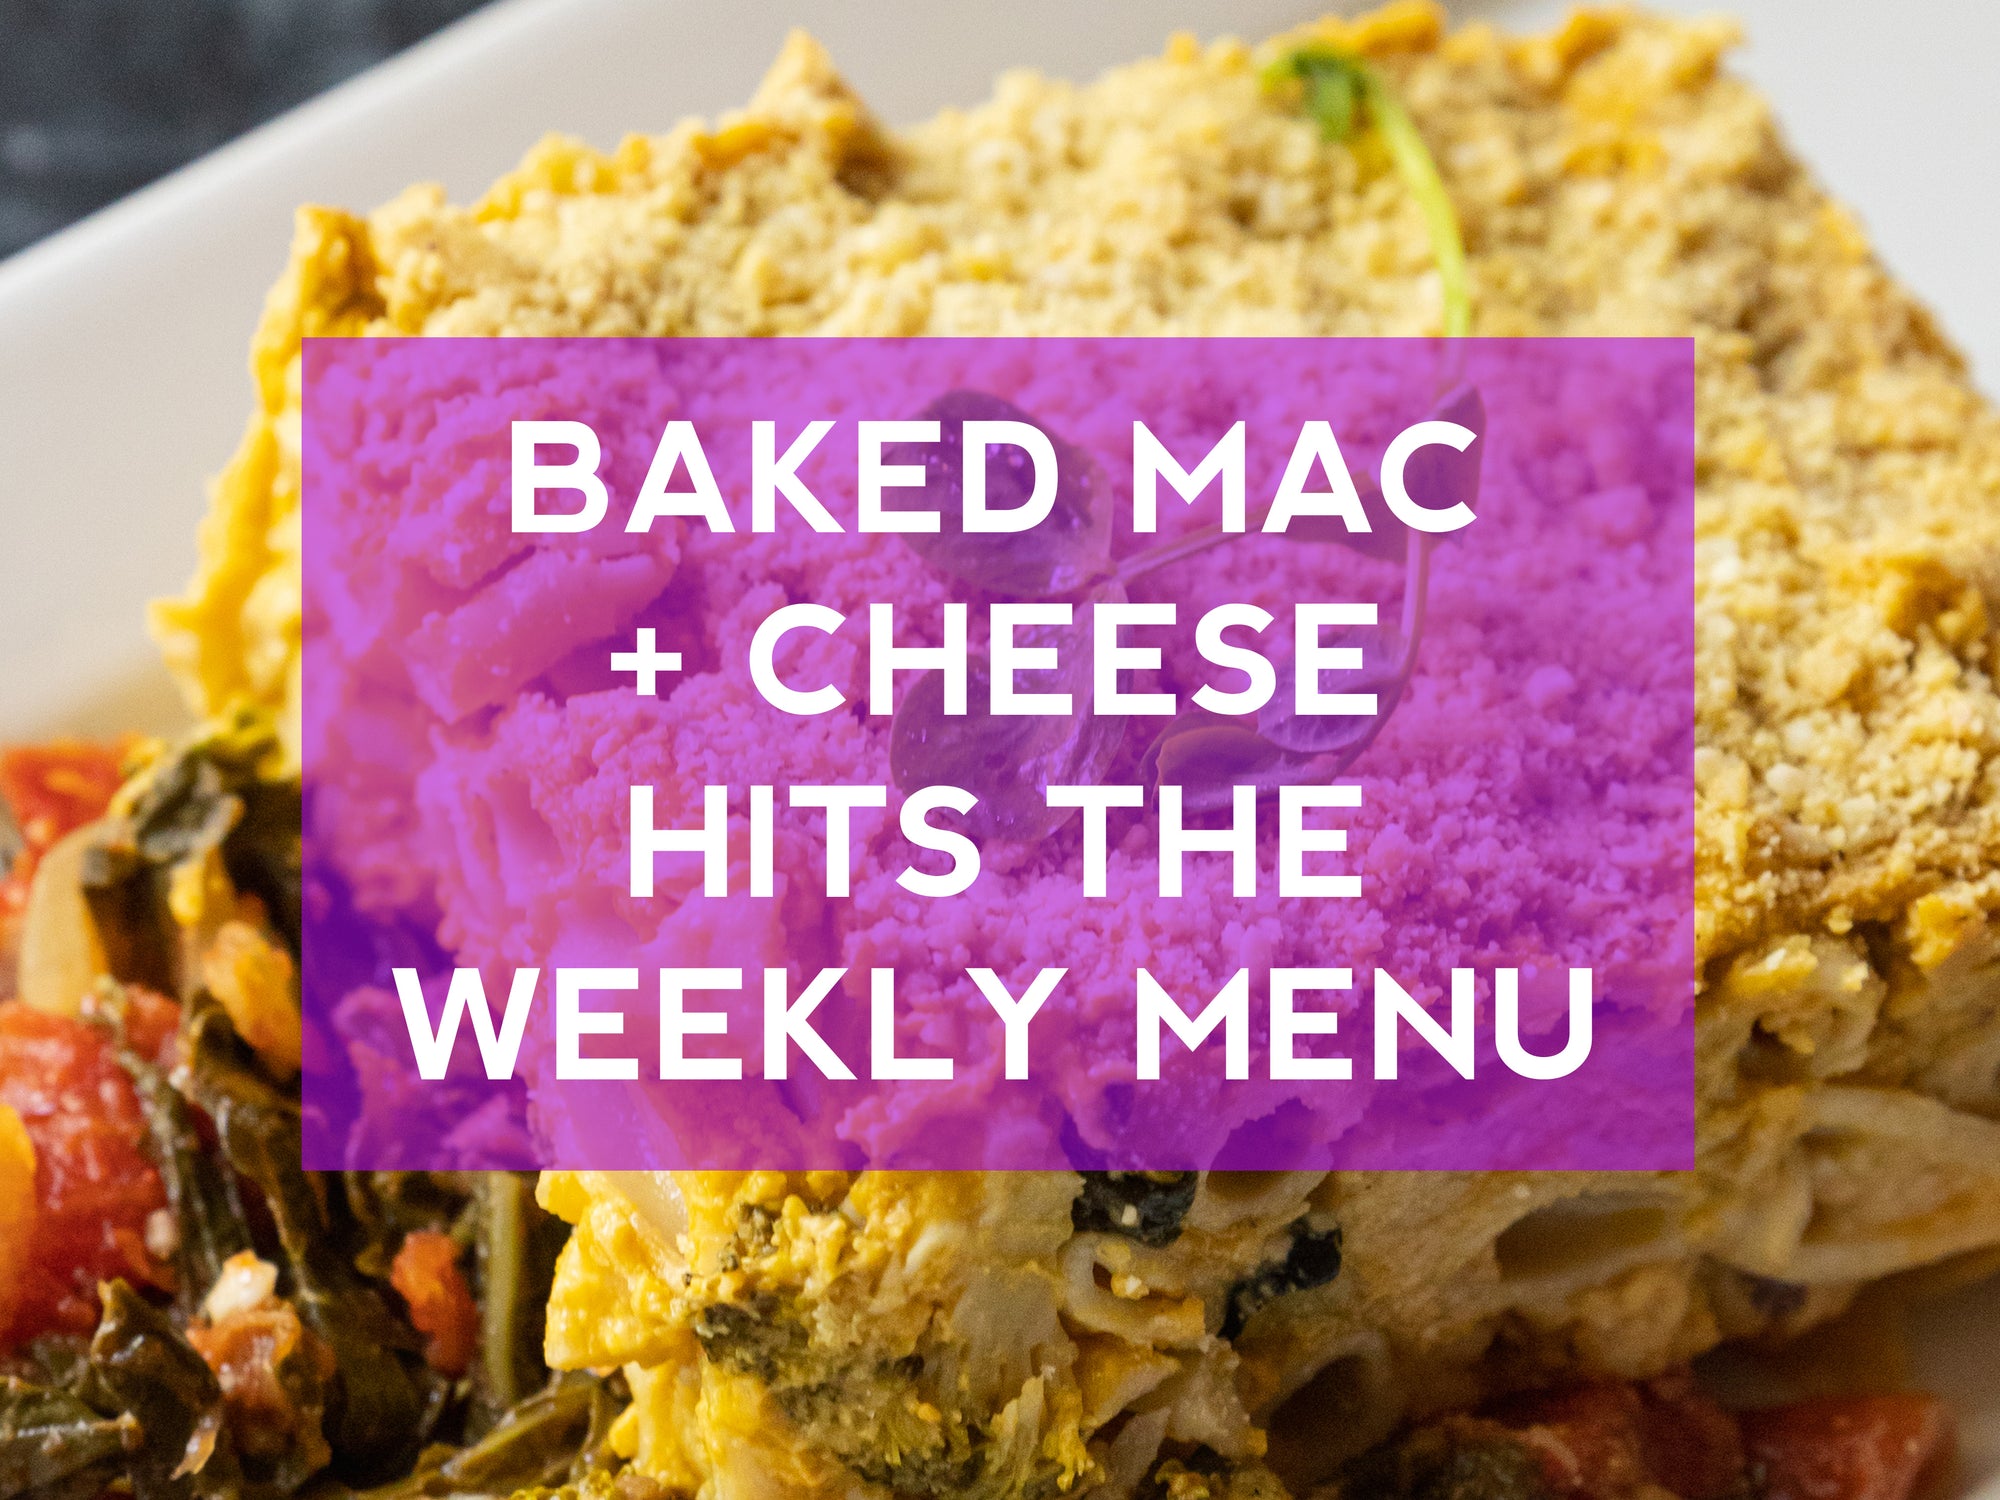 Our Mac and Cheese is getting an upgrade!